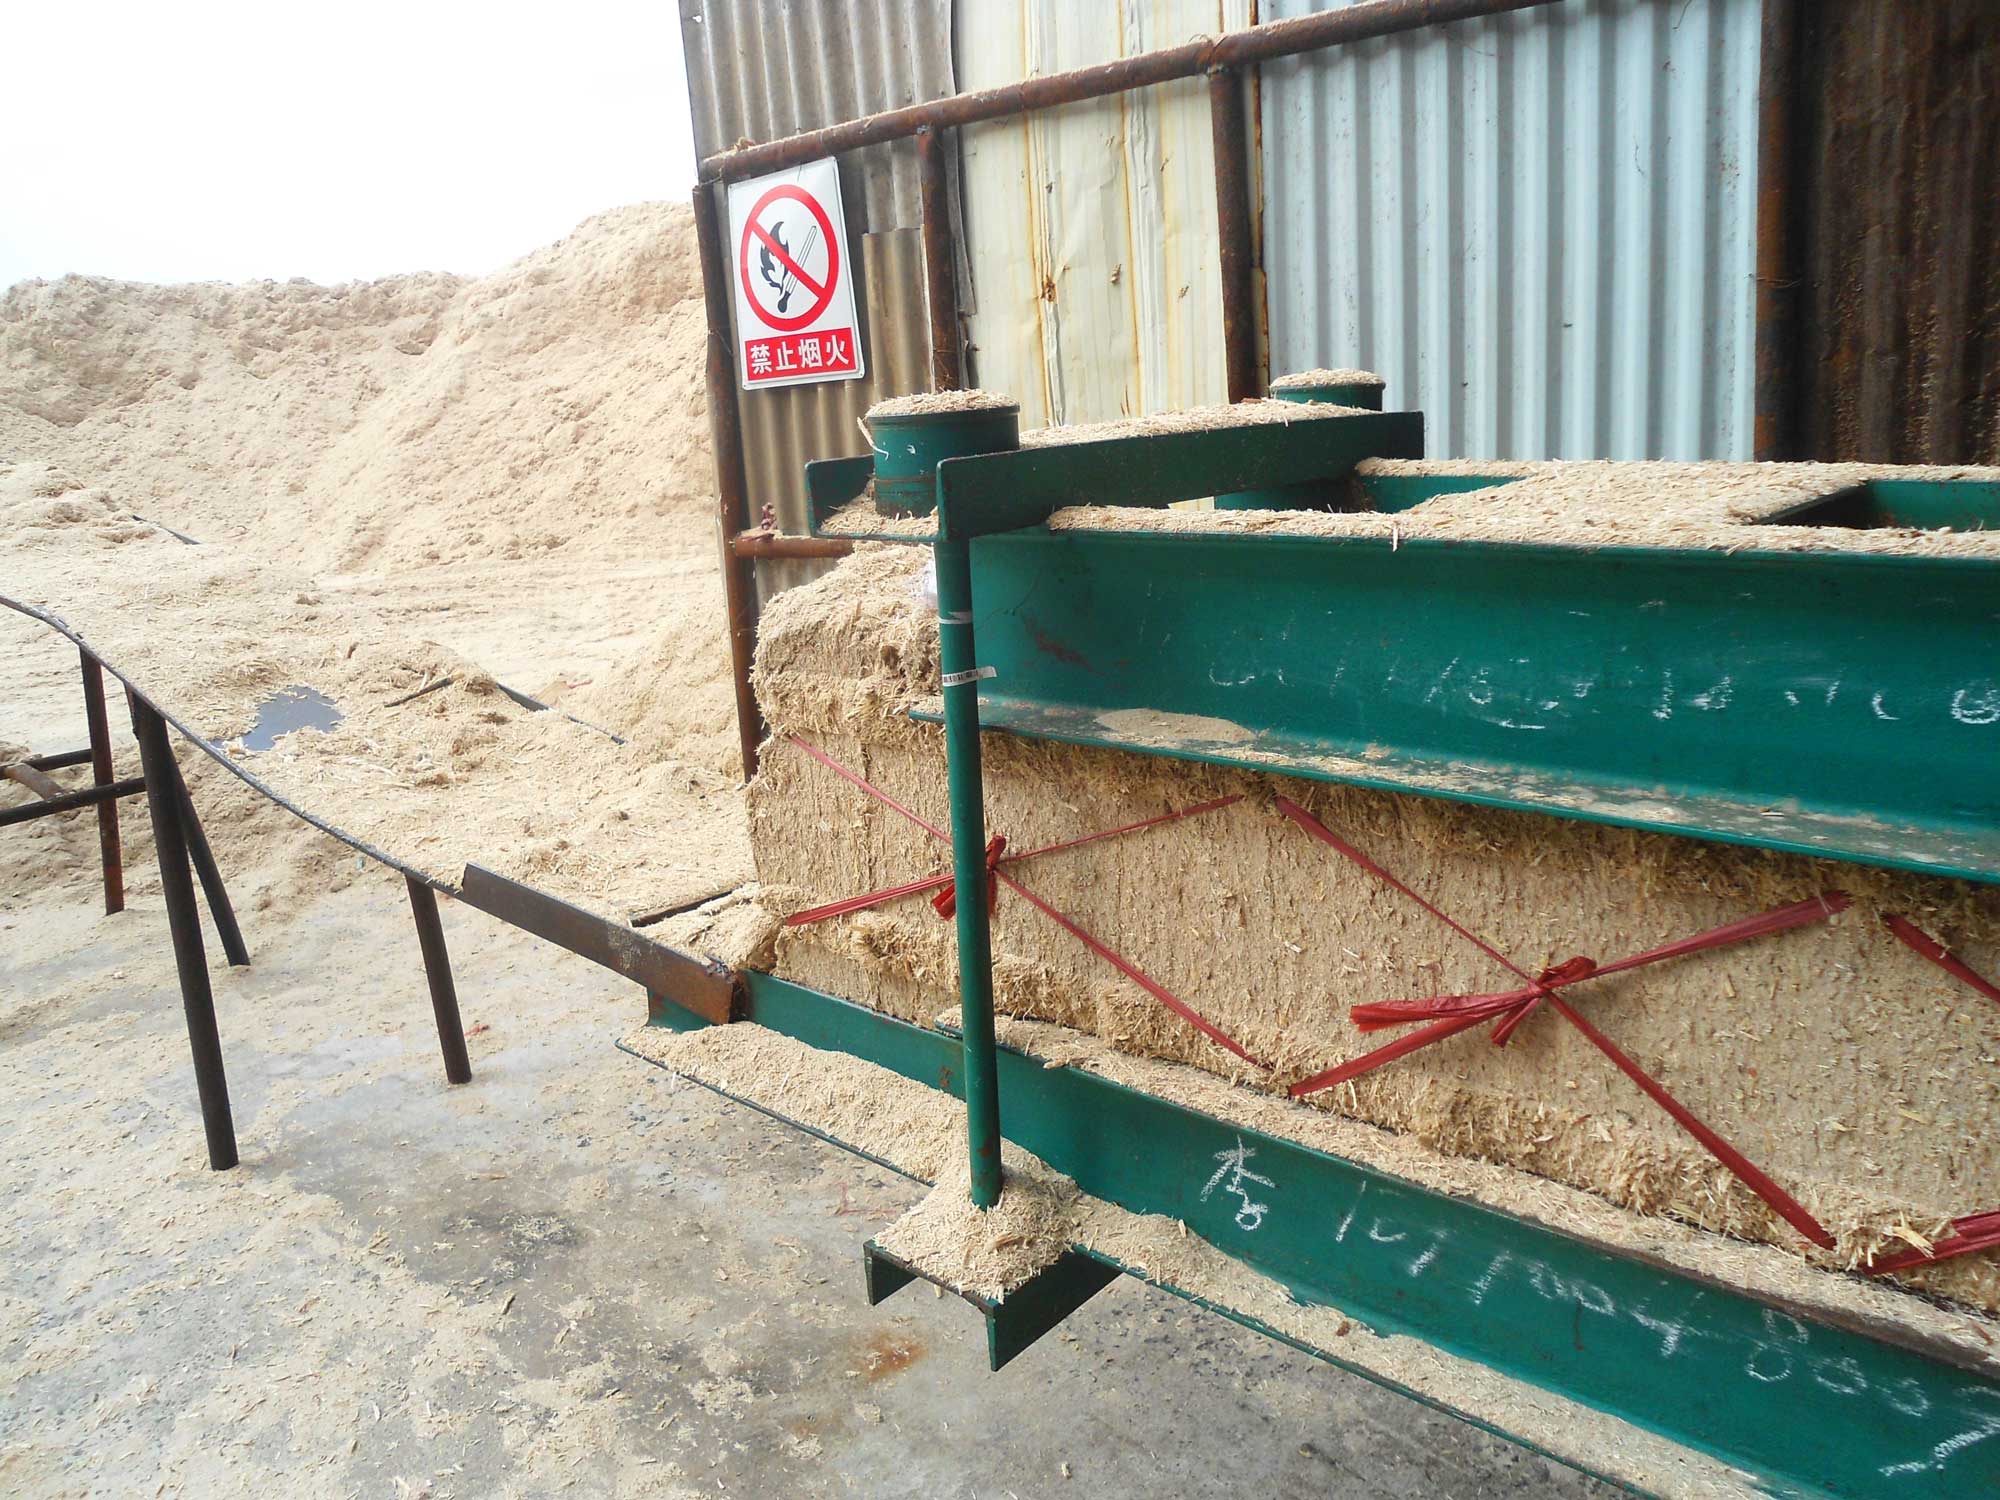 Photograph of a sugarcane bagasse bailing machine in Hainan, China. The photo shows beige fibrous material packed into rectangular blocks and tied with red plastic emerging from a chute. Piles of bagasse can be seen in the background.